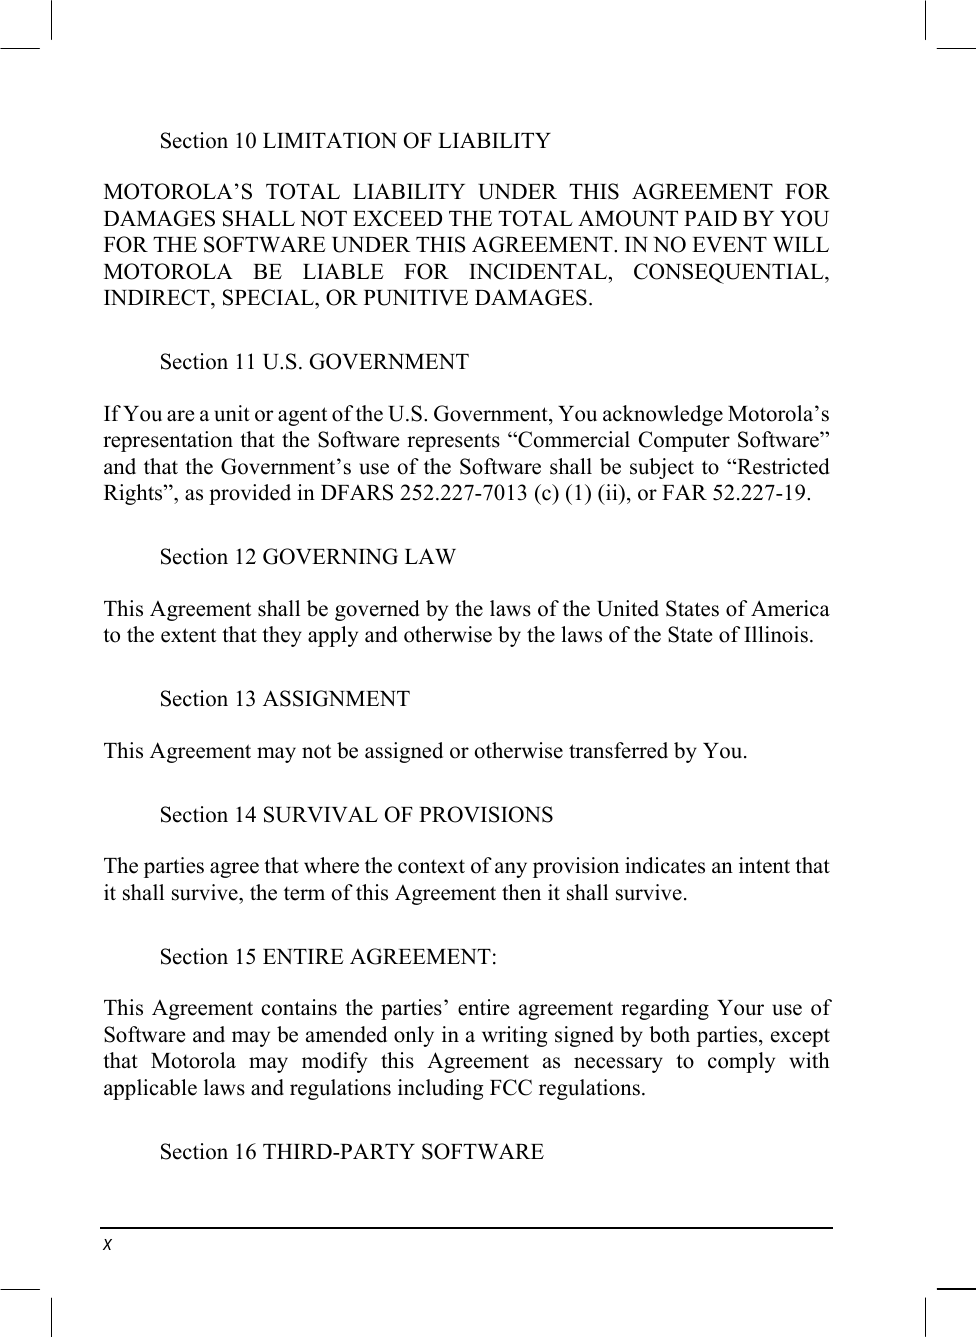  x Section 10 LIMITATION OF LIABILITY MOTOROLA’S TOTAL LIABILITY UNDER THIS AGREEMENT FOR DAMAGES SHALL NOT EXCEED THE TOTAL AMOUNT PAID BY YOU FOR THE SOFTWARE UNDER THIS AGREEMENT. IN NO EVENT WILL MOTOROLA BE LIABLE FOR INCIDENTAL, CONSEQUENTIAL, INDIRECT, SPECIAL, OR PUNITIVE DAMAGES. Section 11 U.S. GOVERNMENT If You are a unit or agent of the U.S. Government, You acknowledge Motorola’s representation that the Software represents “Commercial Computer Software” and that the Government’s use of the Software shall be subject to “Restricted Rights”, as provided in DFARS 252.227-7013 (c) (1) (ii), or FAR 52.227-19. Section 12 GOVERNING LAW This Agreement shall be governed by the laws of the United States of America to the extent that they apply and otherwise by the laws of the State of Illinois. Section 13 ASSIGNMENT This Agreement may not be assigned or otherwise transferred by You. Section 14 SURVIVAL OF PROVISIONS The parties agree that where the context of any provision indicates an intent that it shall survive, the term of this Agreement then it shall survive. Section 15 ENTIRE AGREEMENT: This Agreement contains the parties’ entire agreement regarding Your use of Software and may be amended only in a writing signed by both parties, except that Motorola may modify this Agreement as necessary to comply with applicable laws and regulations including FCC regulations. Section 16 THIRD-PARTY SOFTWARE 